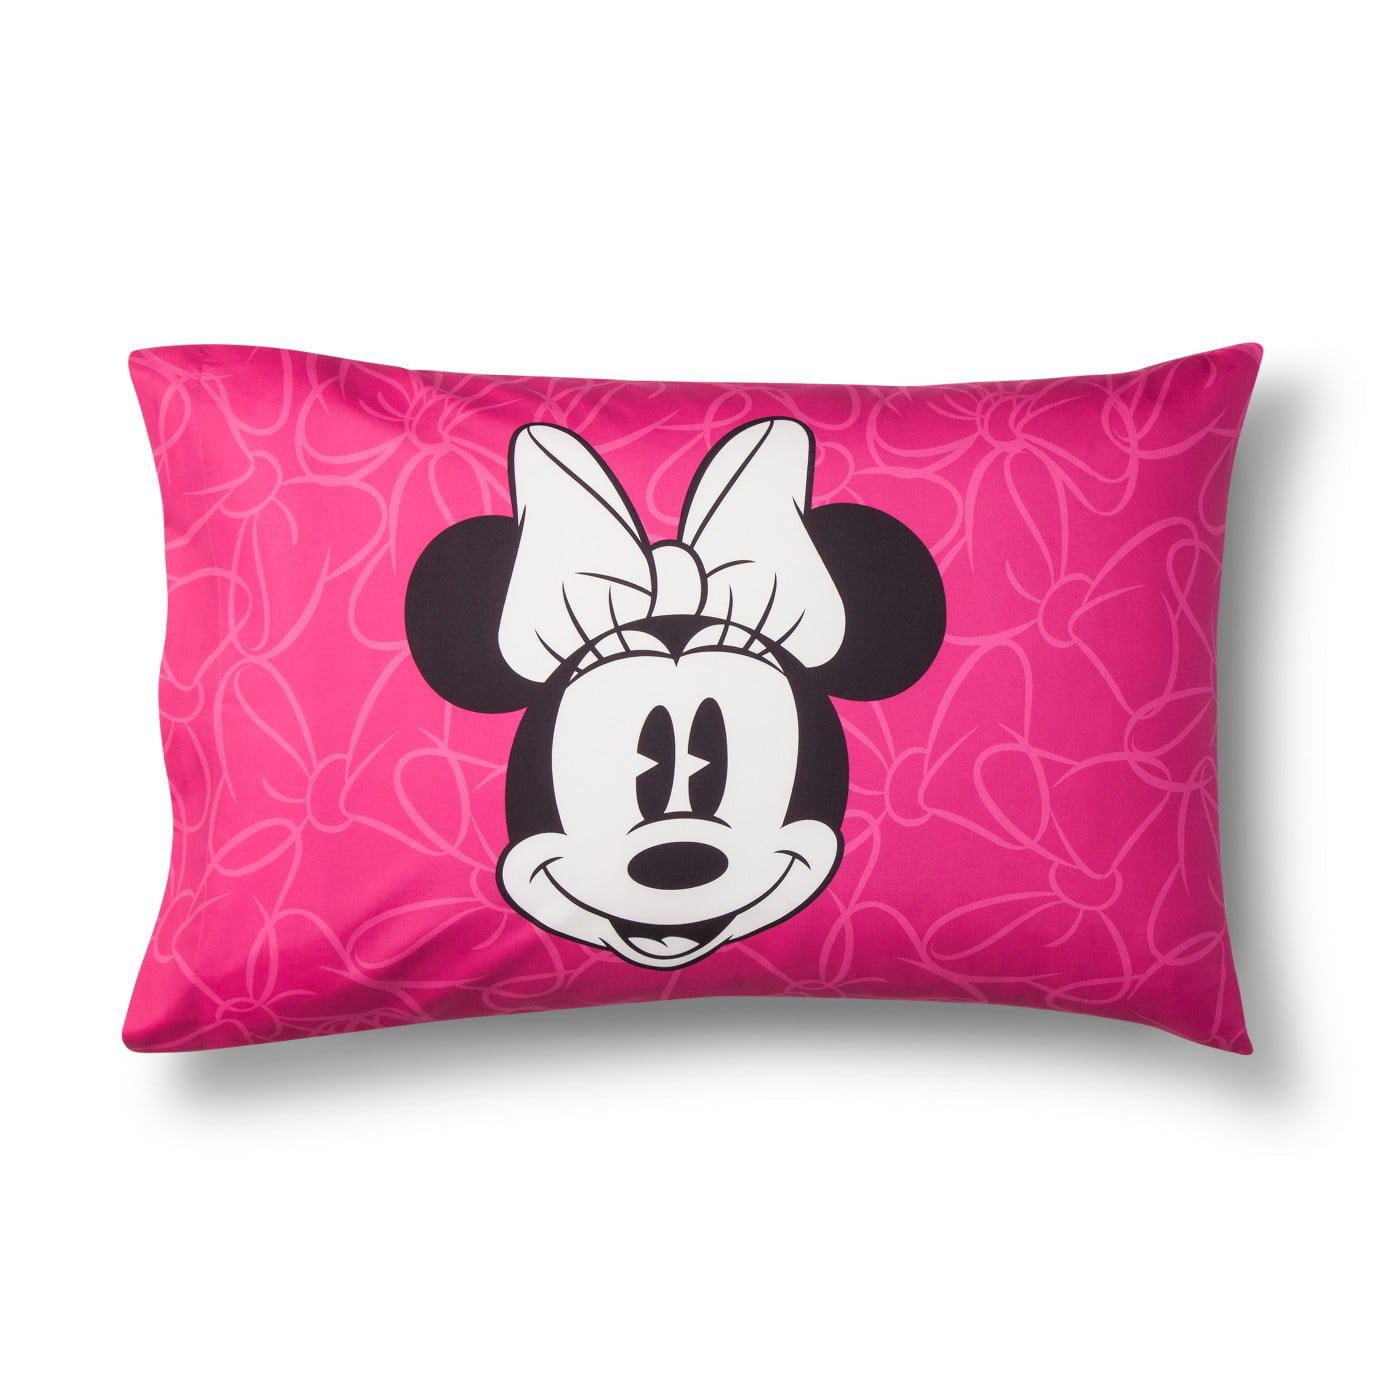 1 Piece Pillow Case Only 20 X 30 Inch New Minnie Mouse Pillowcase for Kids 